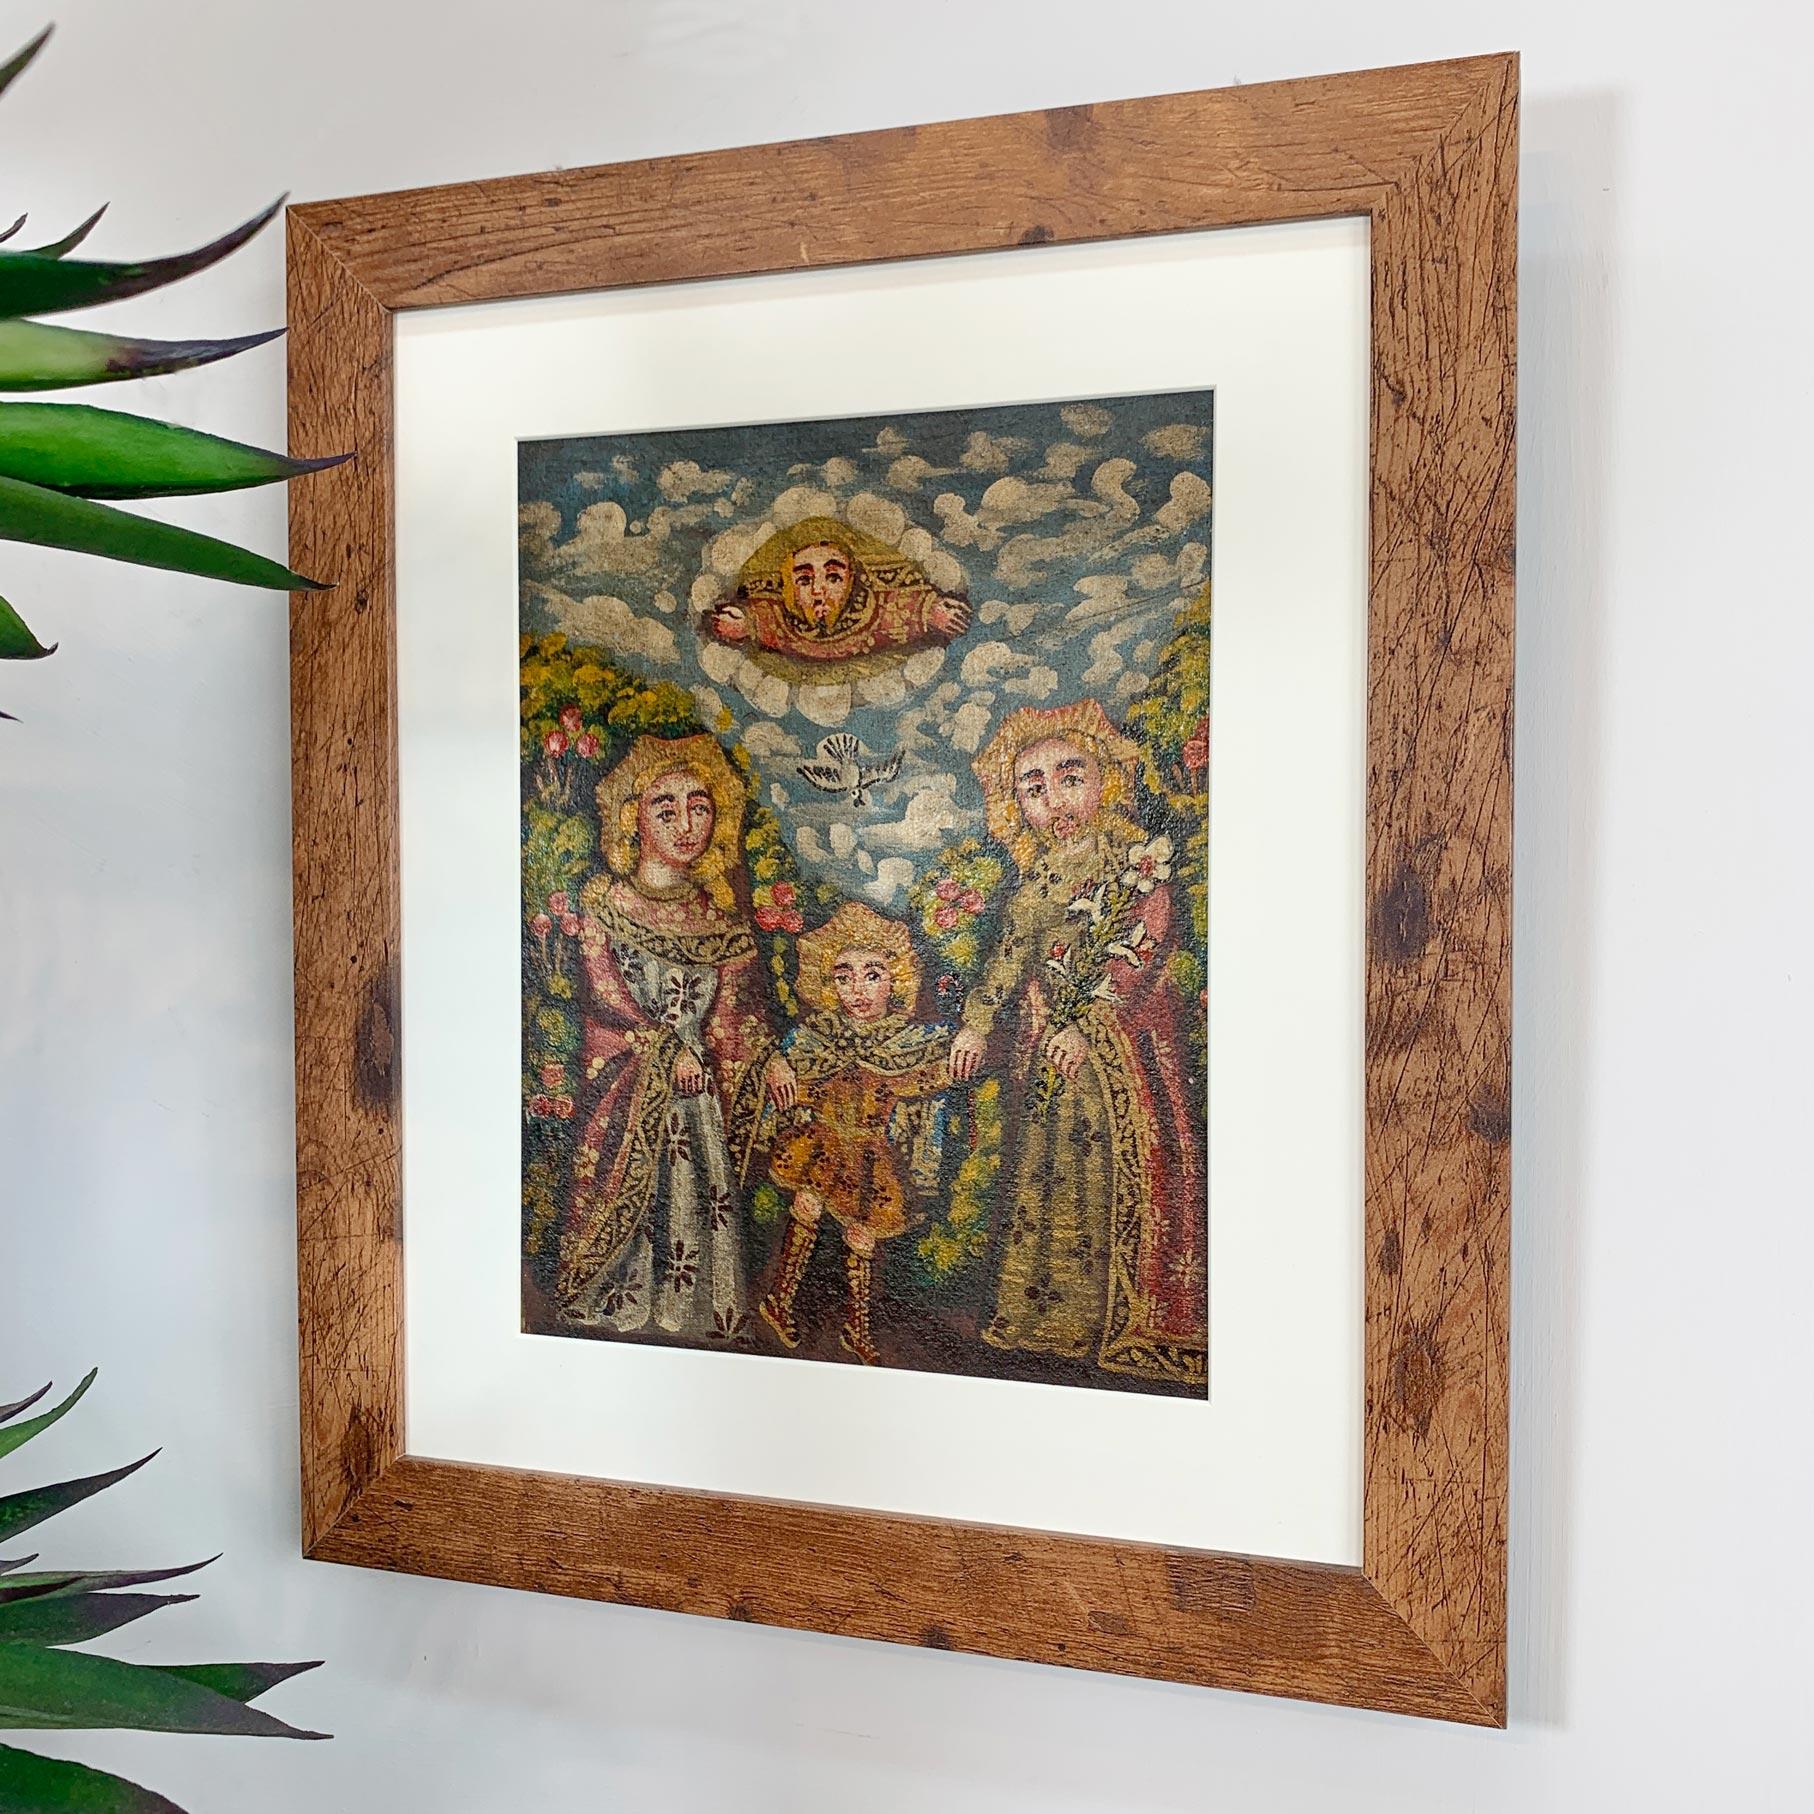 An exceptional early Cuzco School painting, naive depiction of the Holy Family, presented in a contemporary wooden frame.



The Cuzco or Cusco school was a Roman Catholic artistic tradition that began in the 1500's in Peru, following the Spanish